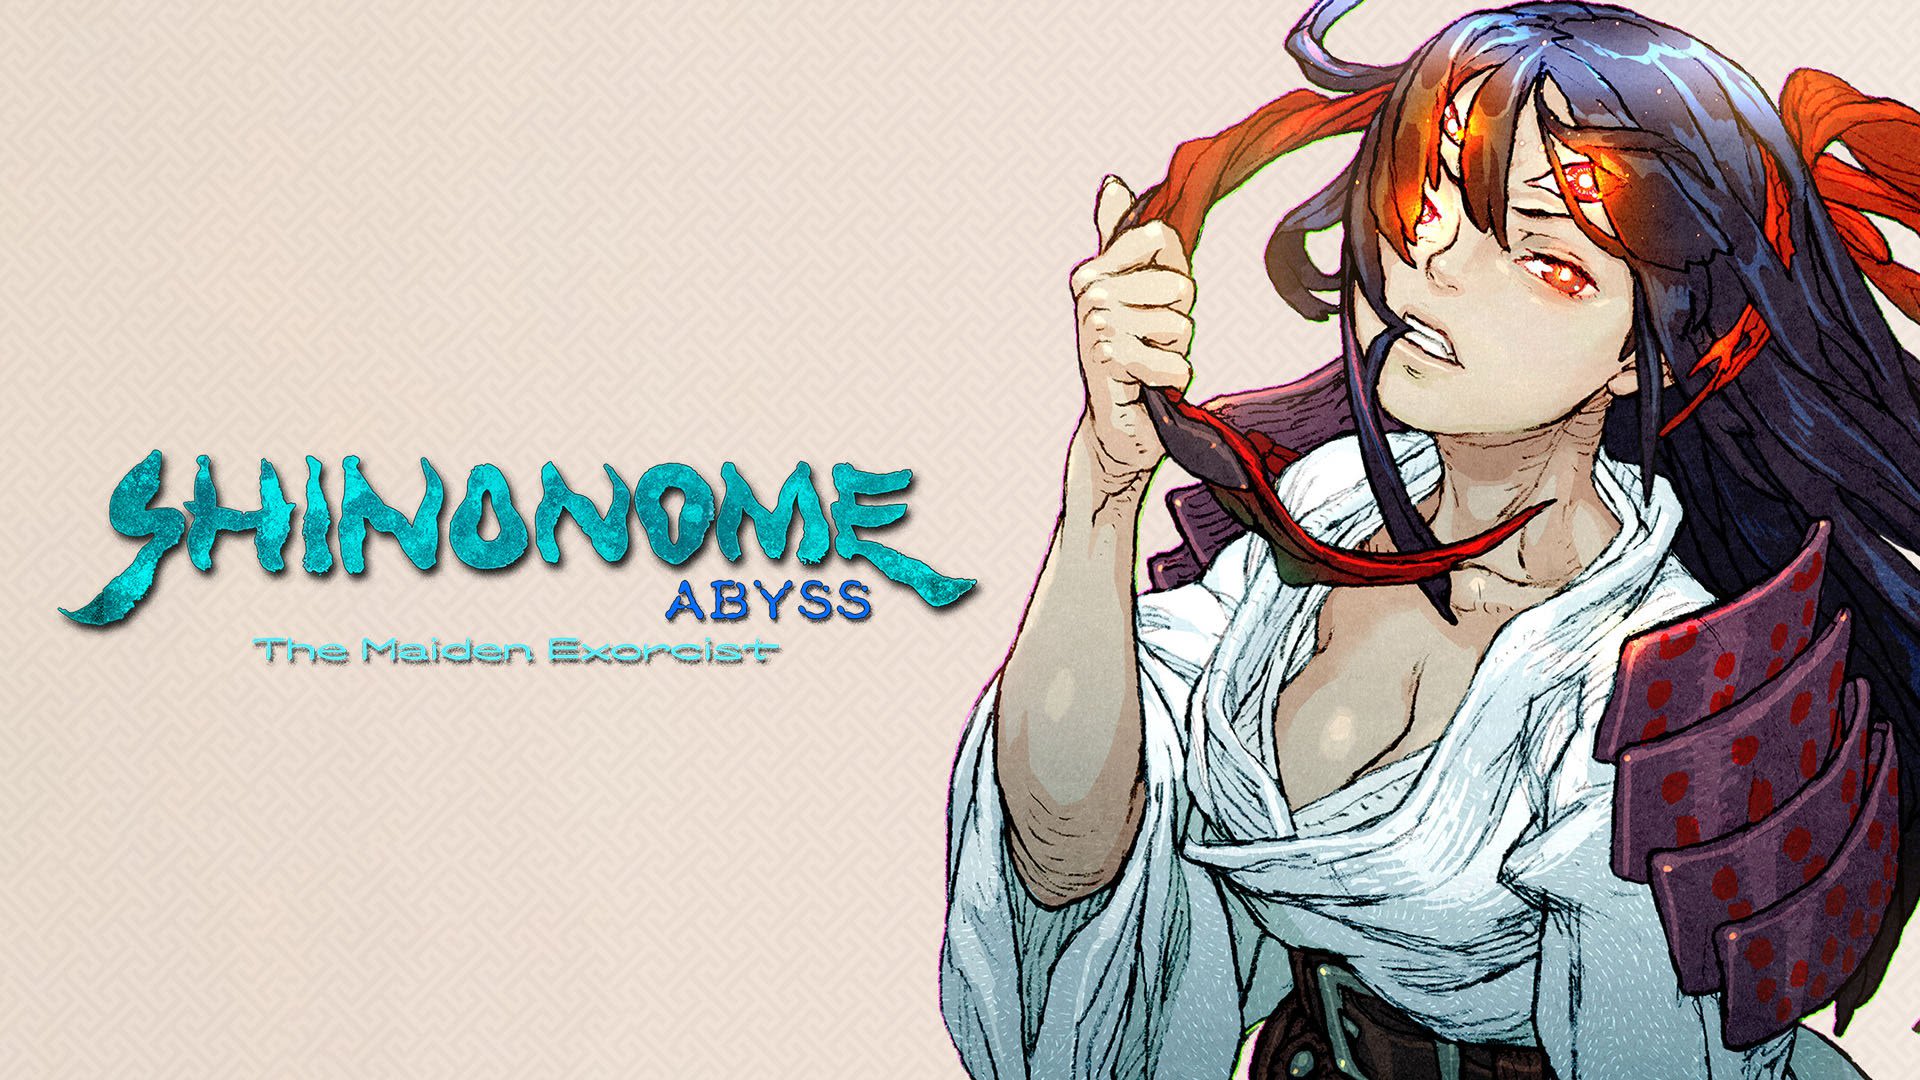 Roguelike horror action game SHINONOME ABYSS: The Maiden Exorcist announced for PC